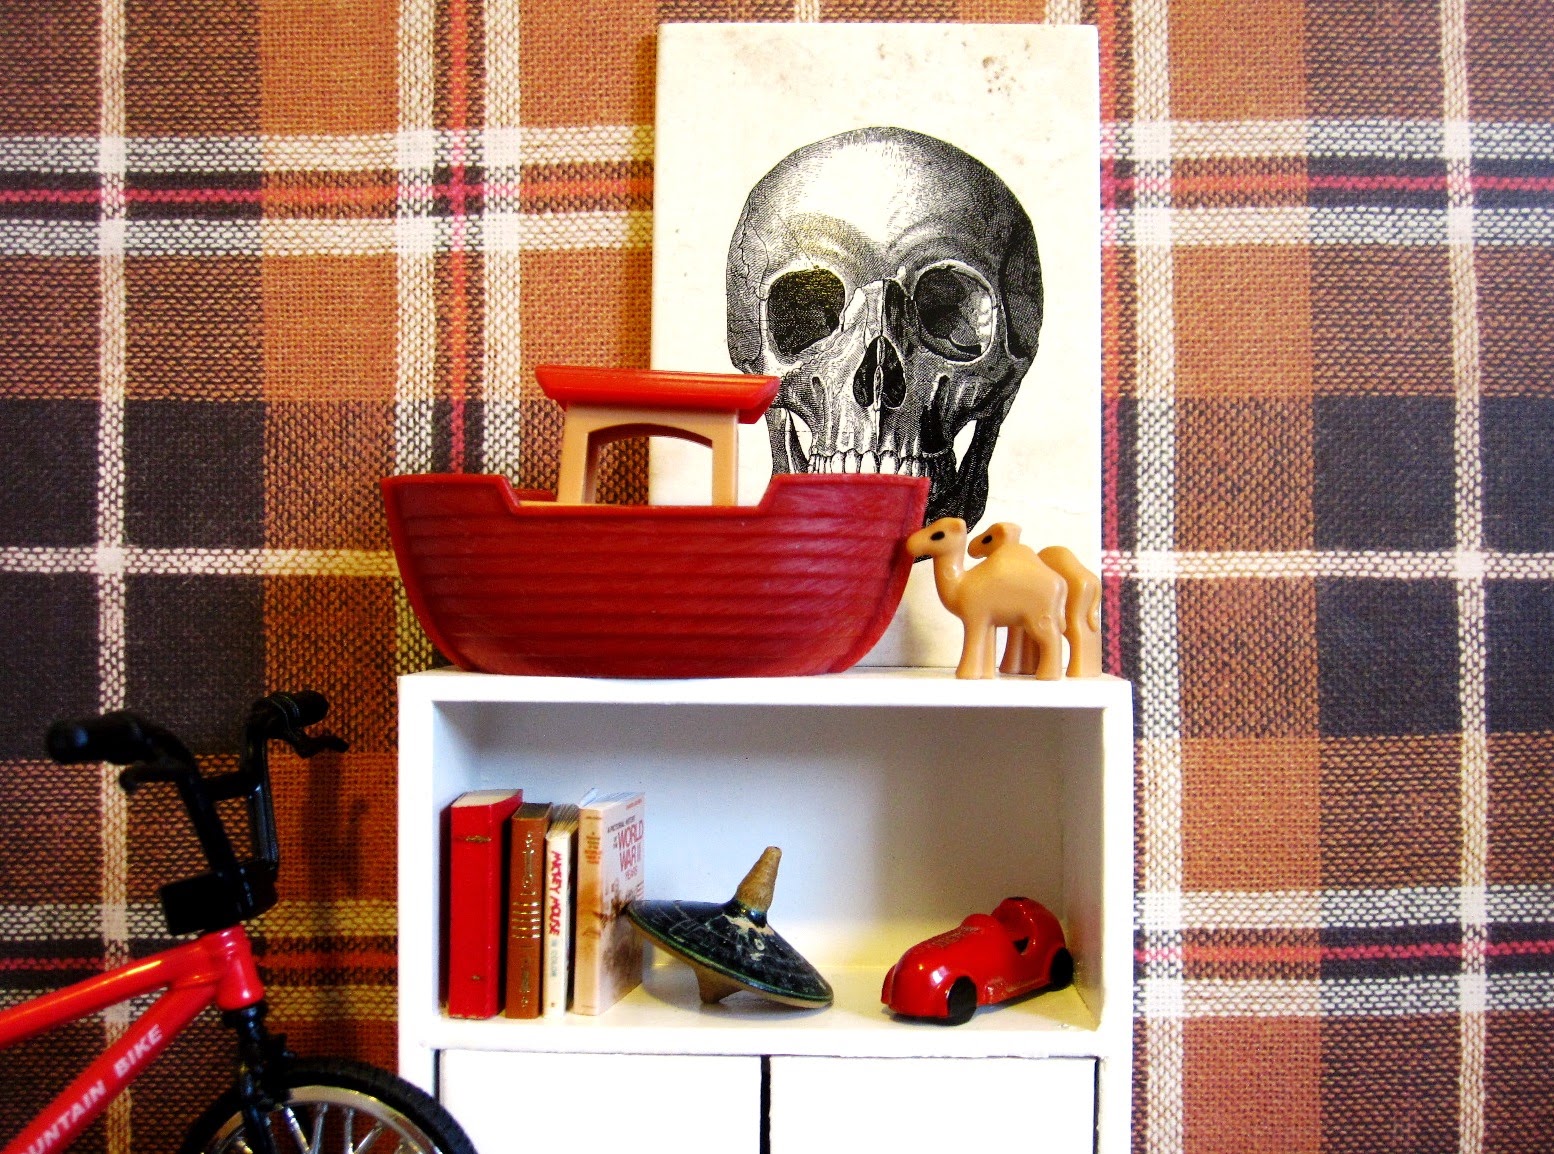 Modern dolls' house scene of part of a boy's room, with fawn, red and white tartan wallpaper and a white shelf holding a Noah's ark, a toy car, some books and a spinning top. To one side is a BMX-style bike.